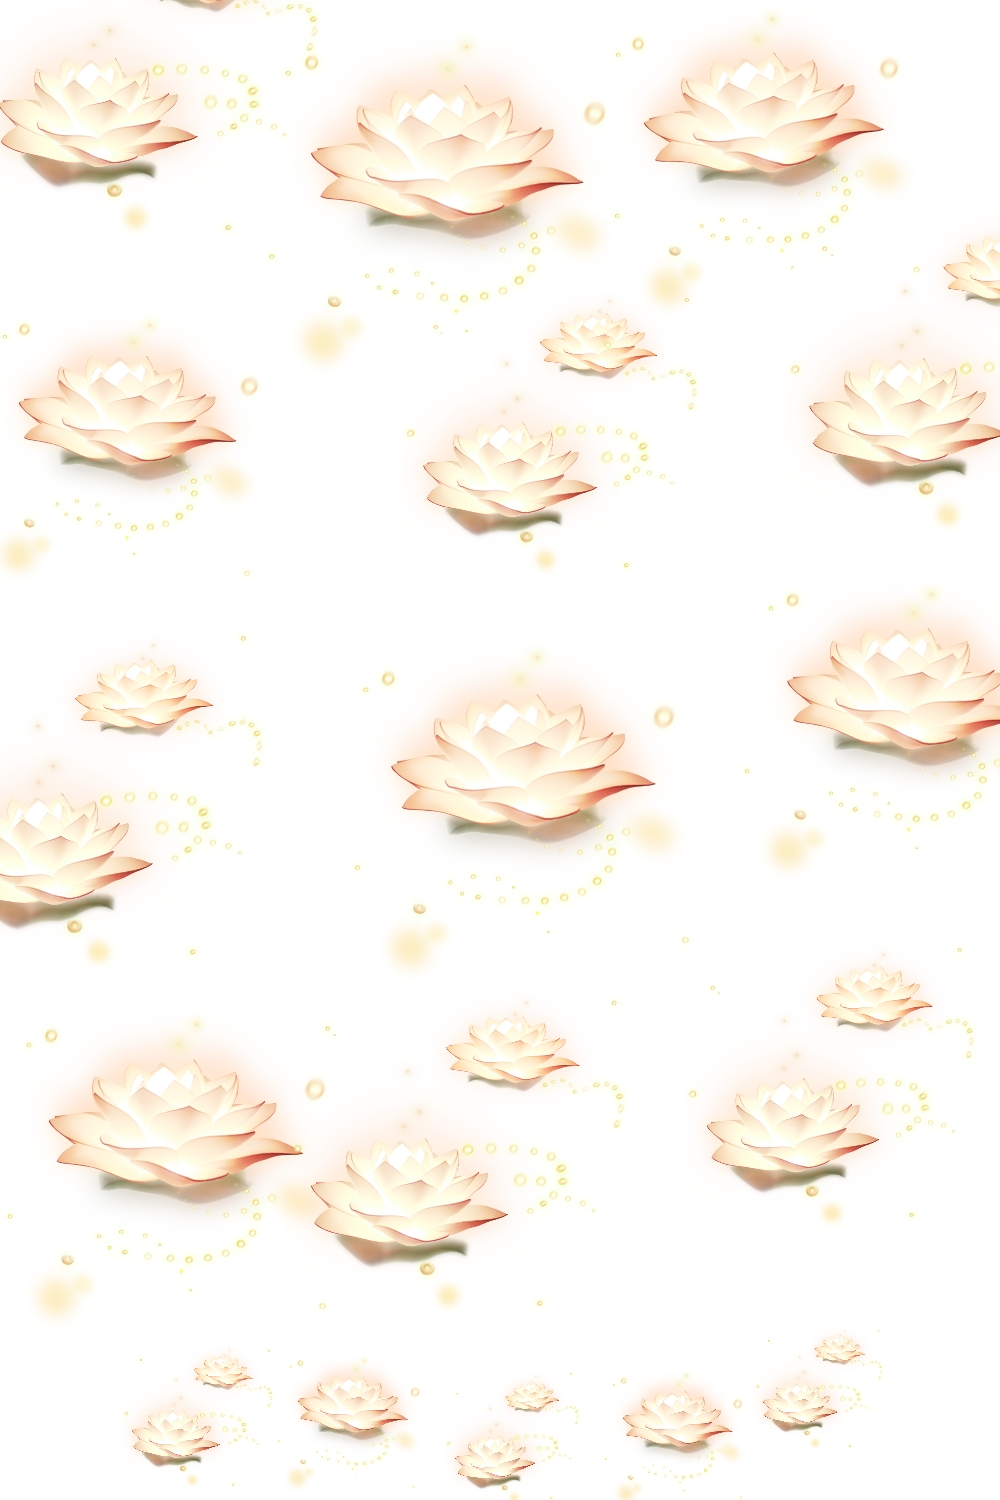 Flowers pinterest preview image.